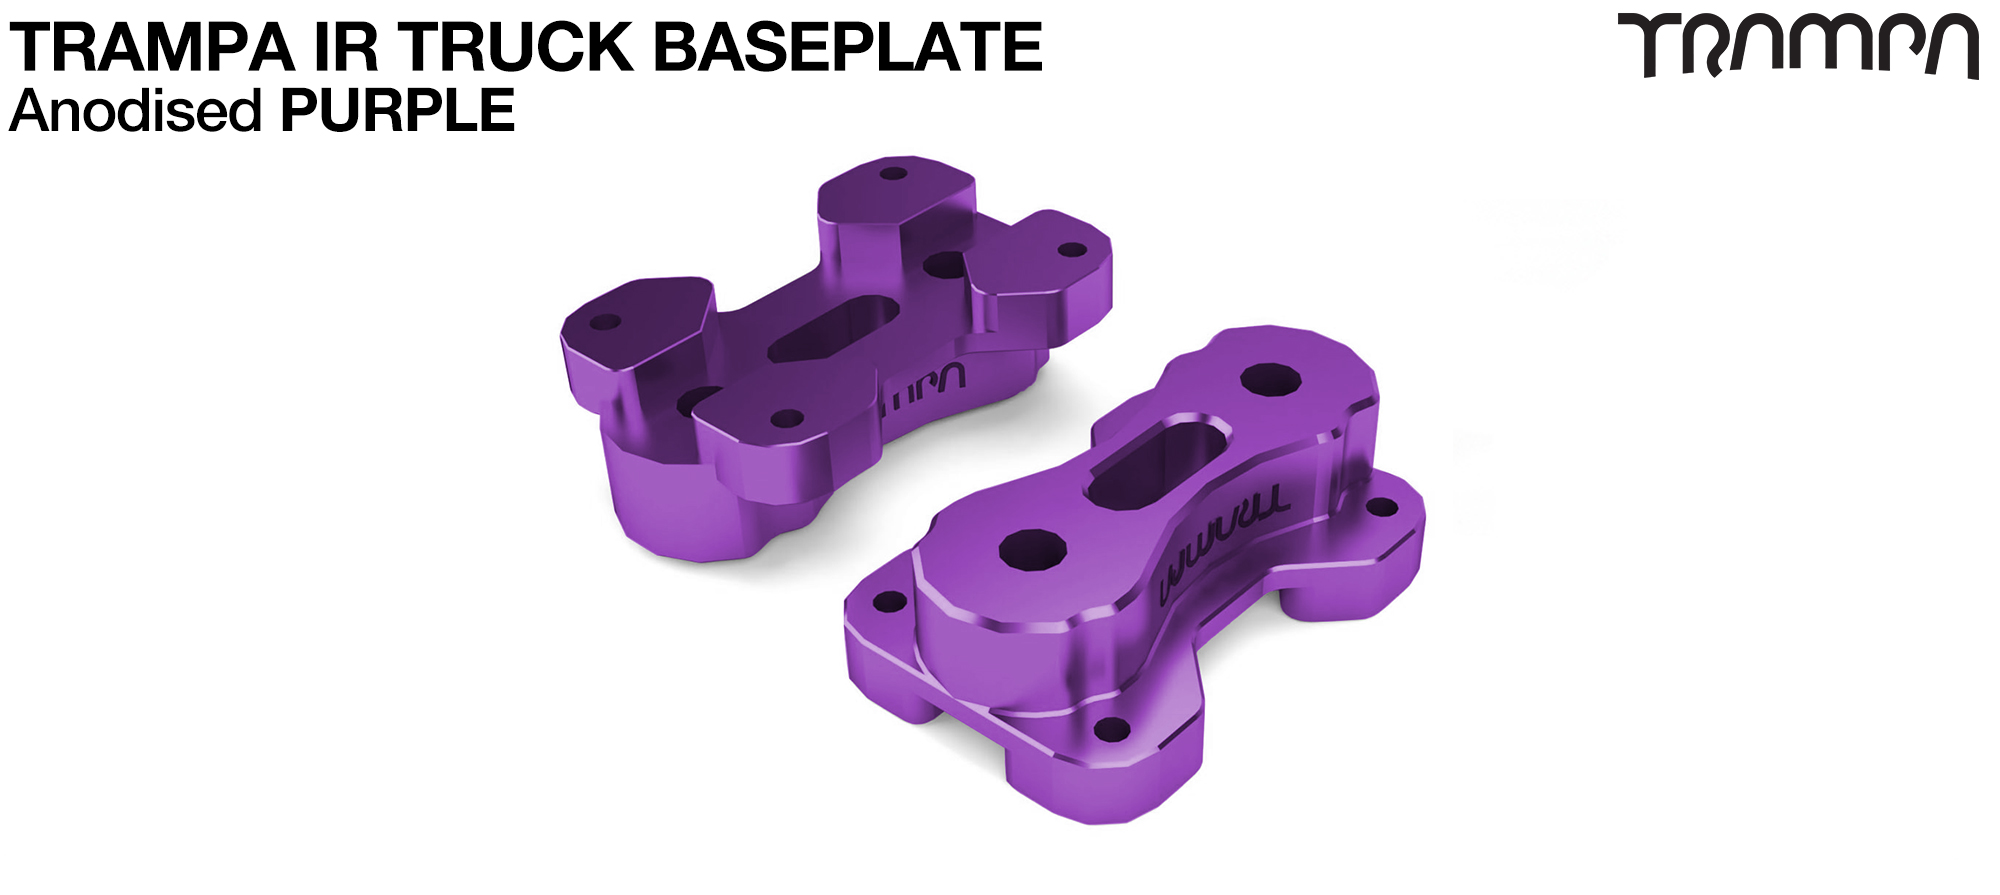 TRAMPA IR BASEPLATE - CNC Precision made TRAMPA IR Trucks are super light & Packed with performance - PURPLE